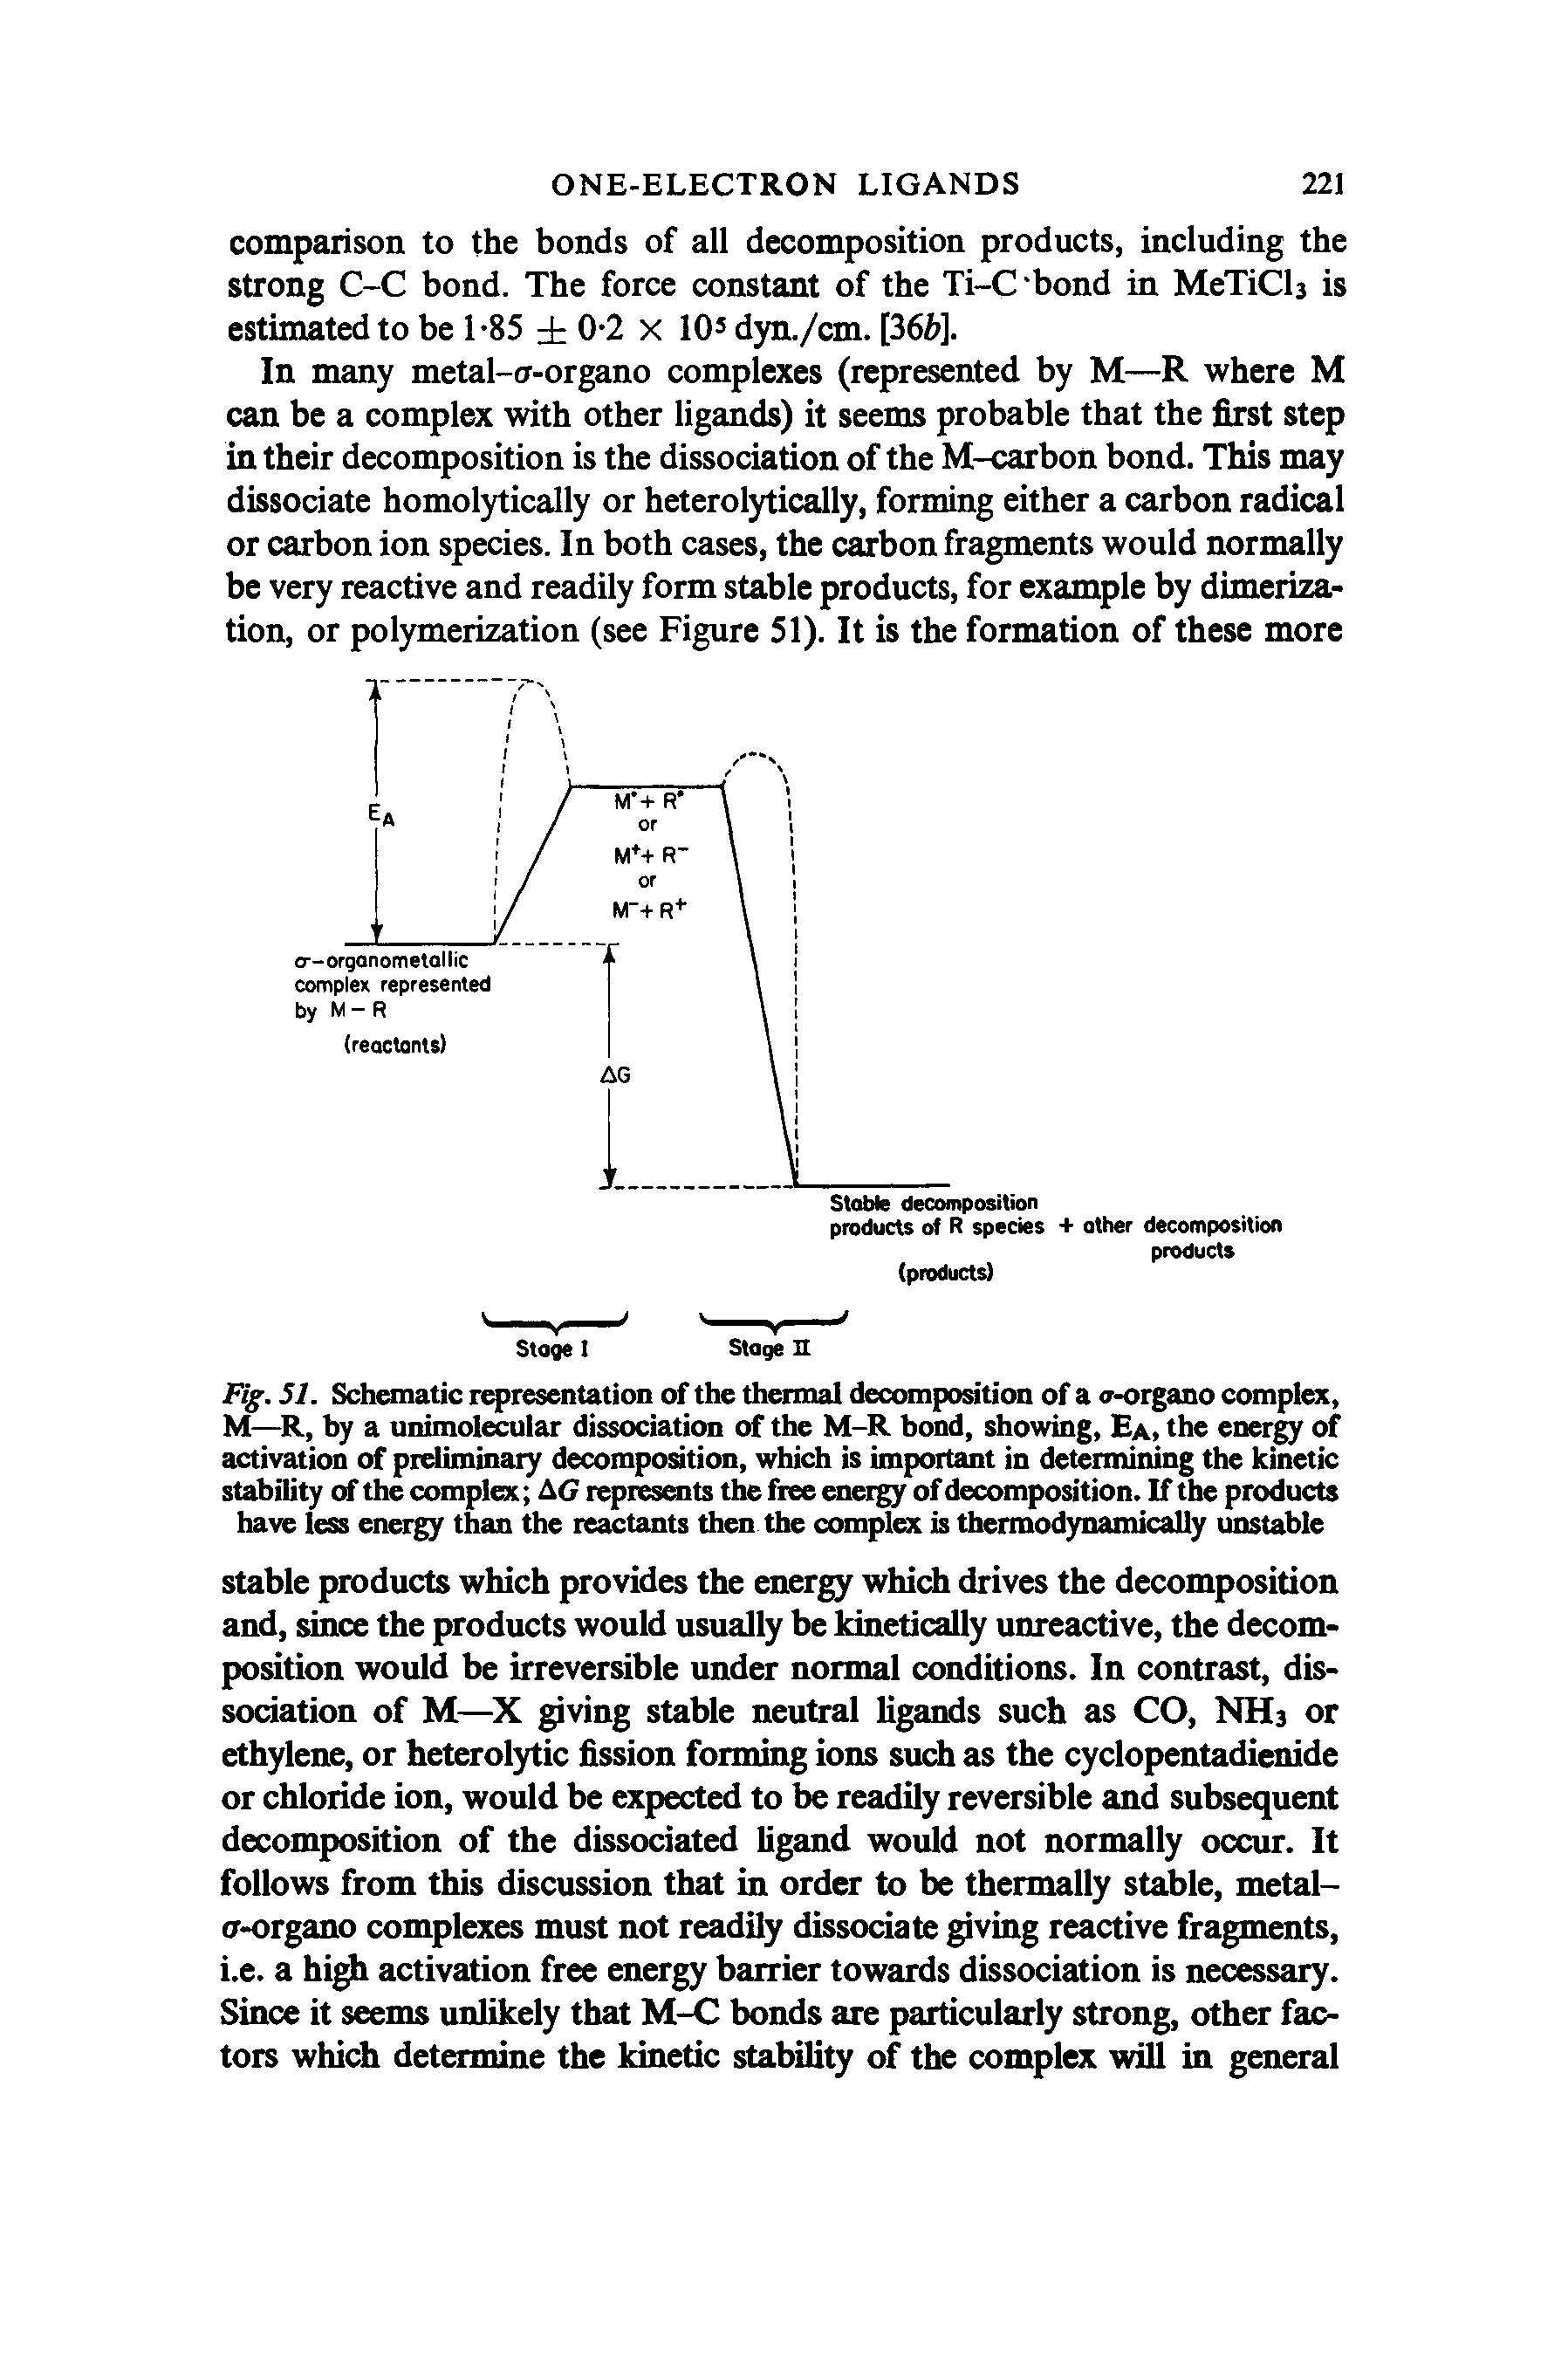 Fig. 51. Schematic representation of the thermal decompoation of a o-organo cmnpkx, M— R, by a unimolecuiar dissociation of the M-R bond, showing, Ea, the ener of activation of preliminary decompoation, which is important in determining the kinetic stability of the complex A(j represoits the free energy of decompoa tion. If the products have less energy than the reactants then the complex is thermodynamicalty unstable...